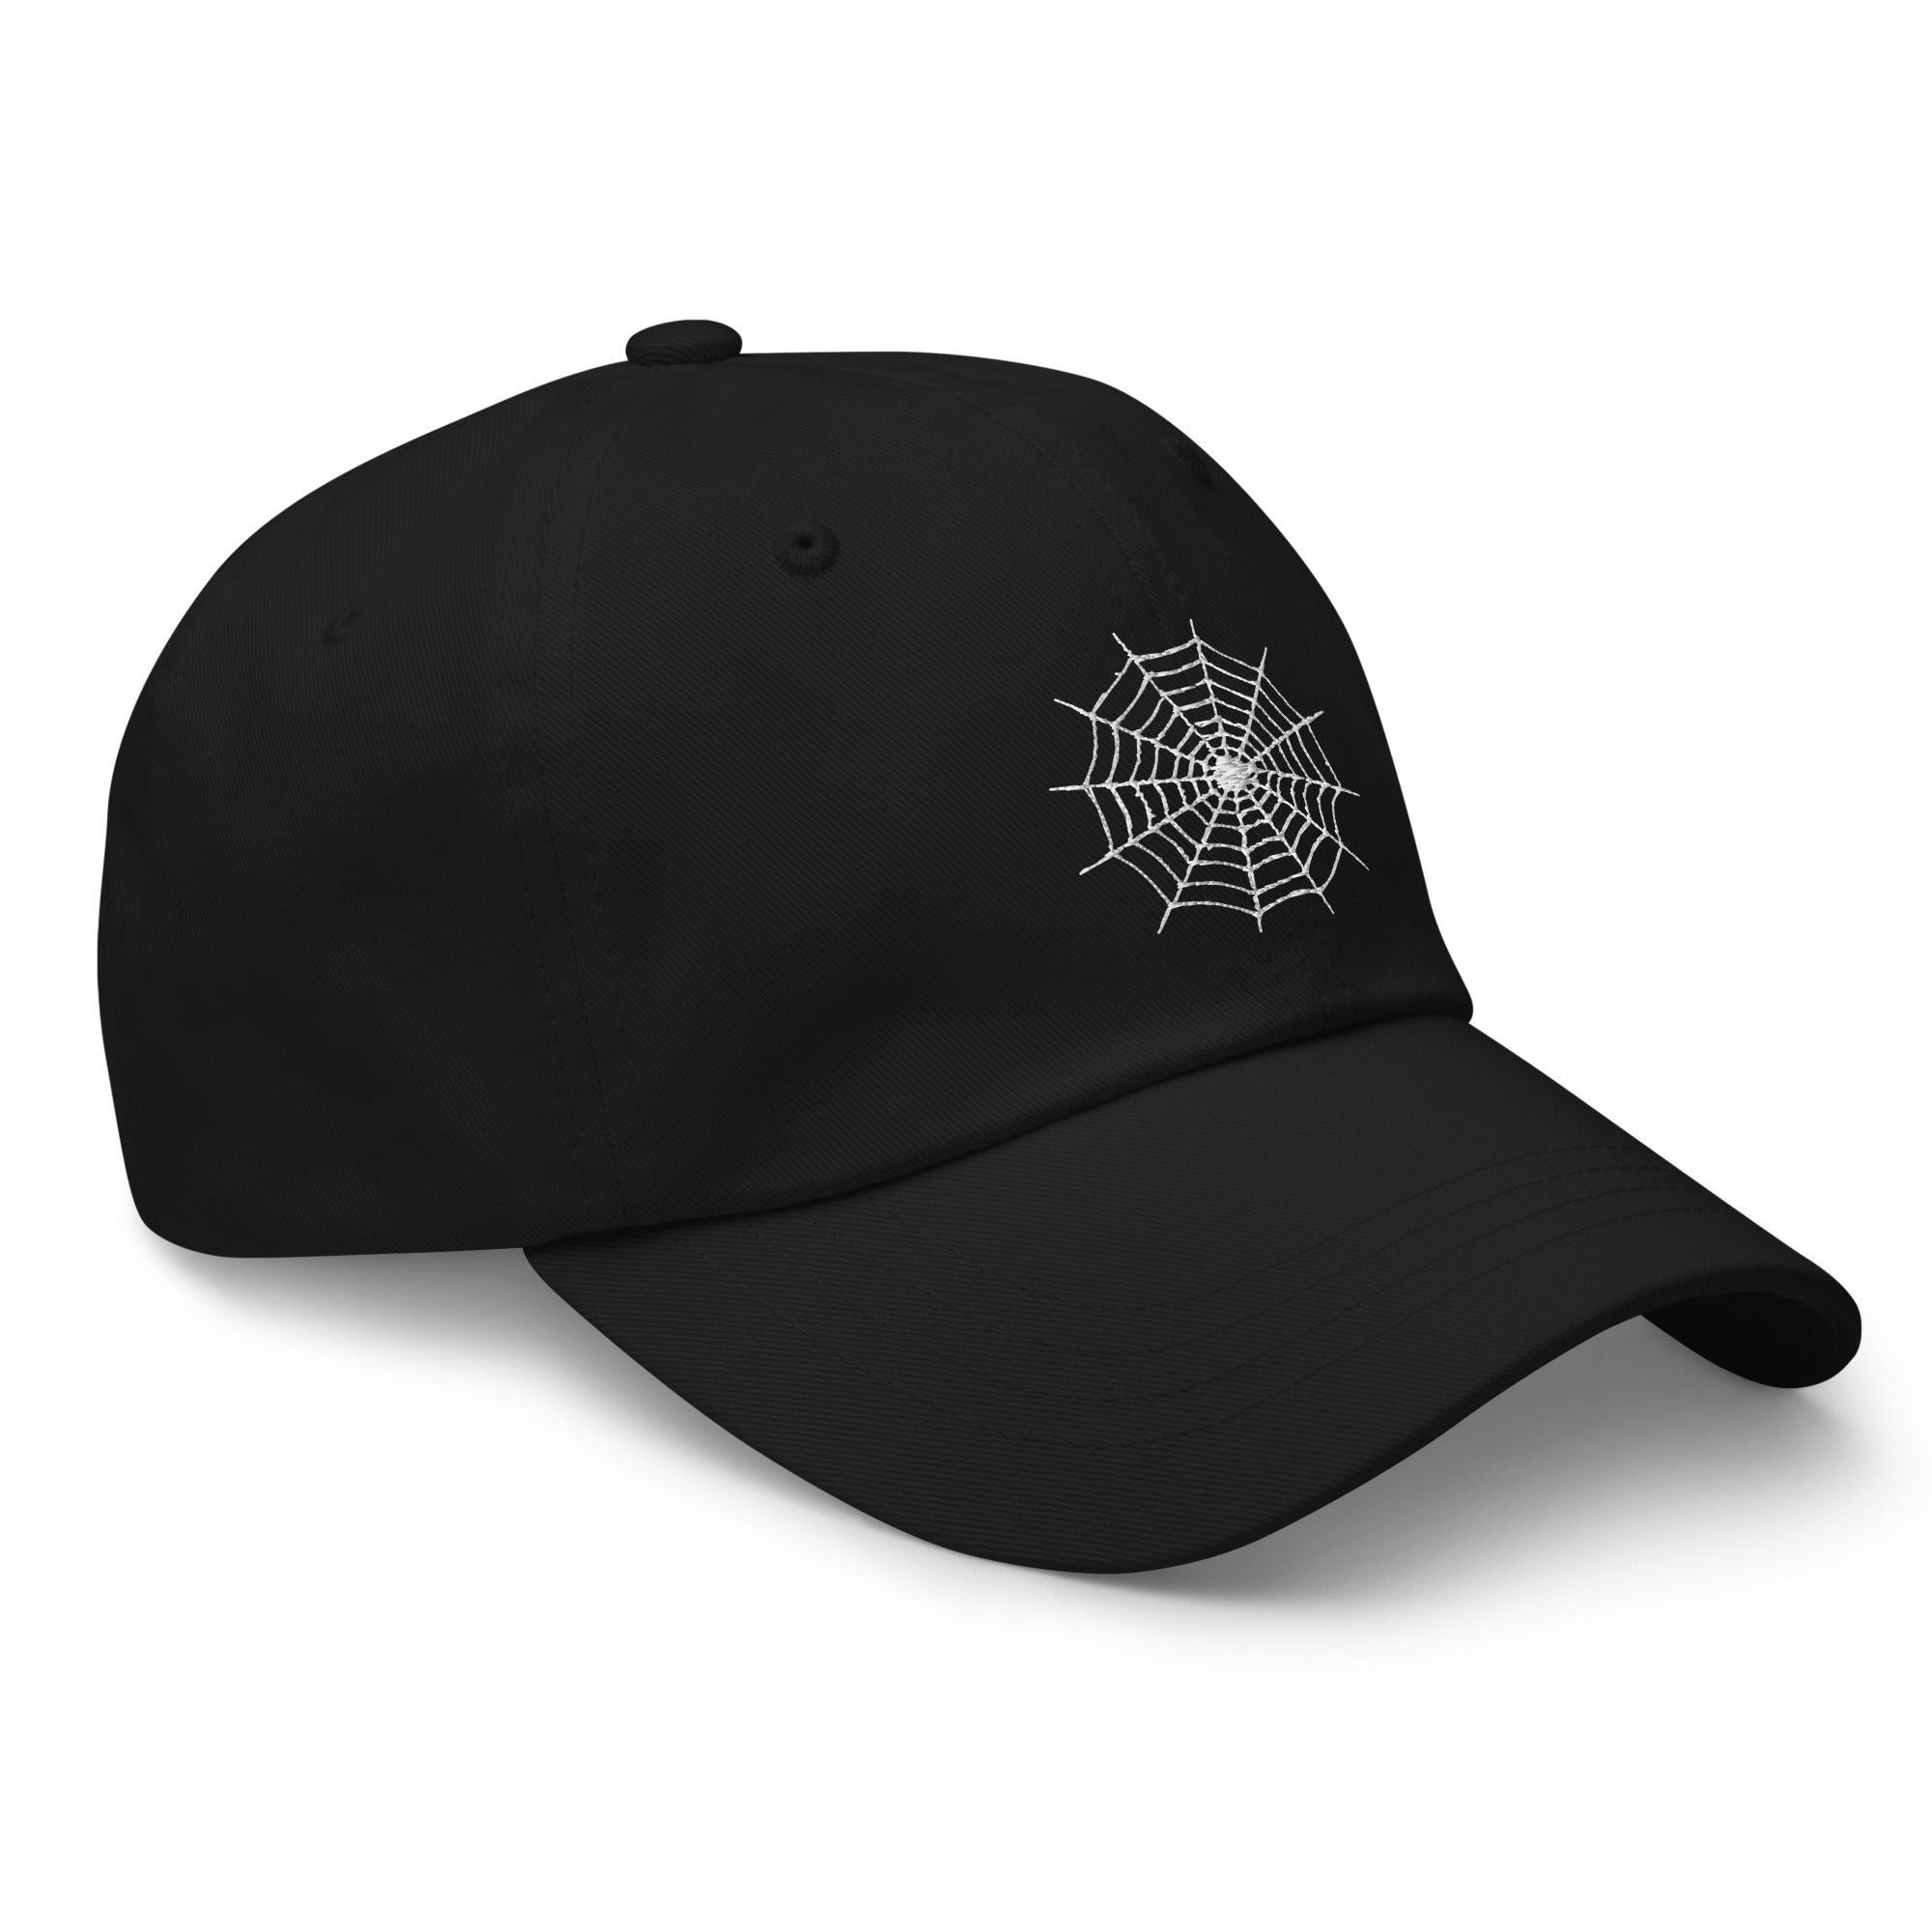 Creepy Spider's Web Embroidered Baseball Cap Goth Halloween Style Spiderweb Dad hat - Edge of Life Designs